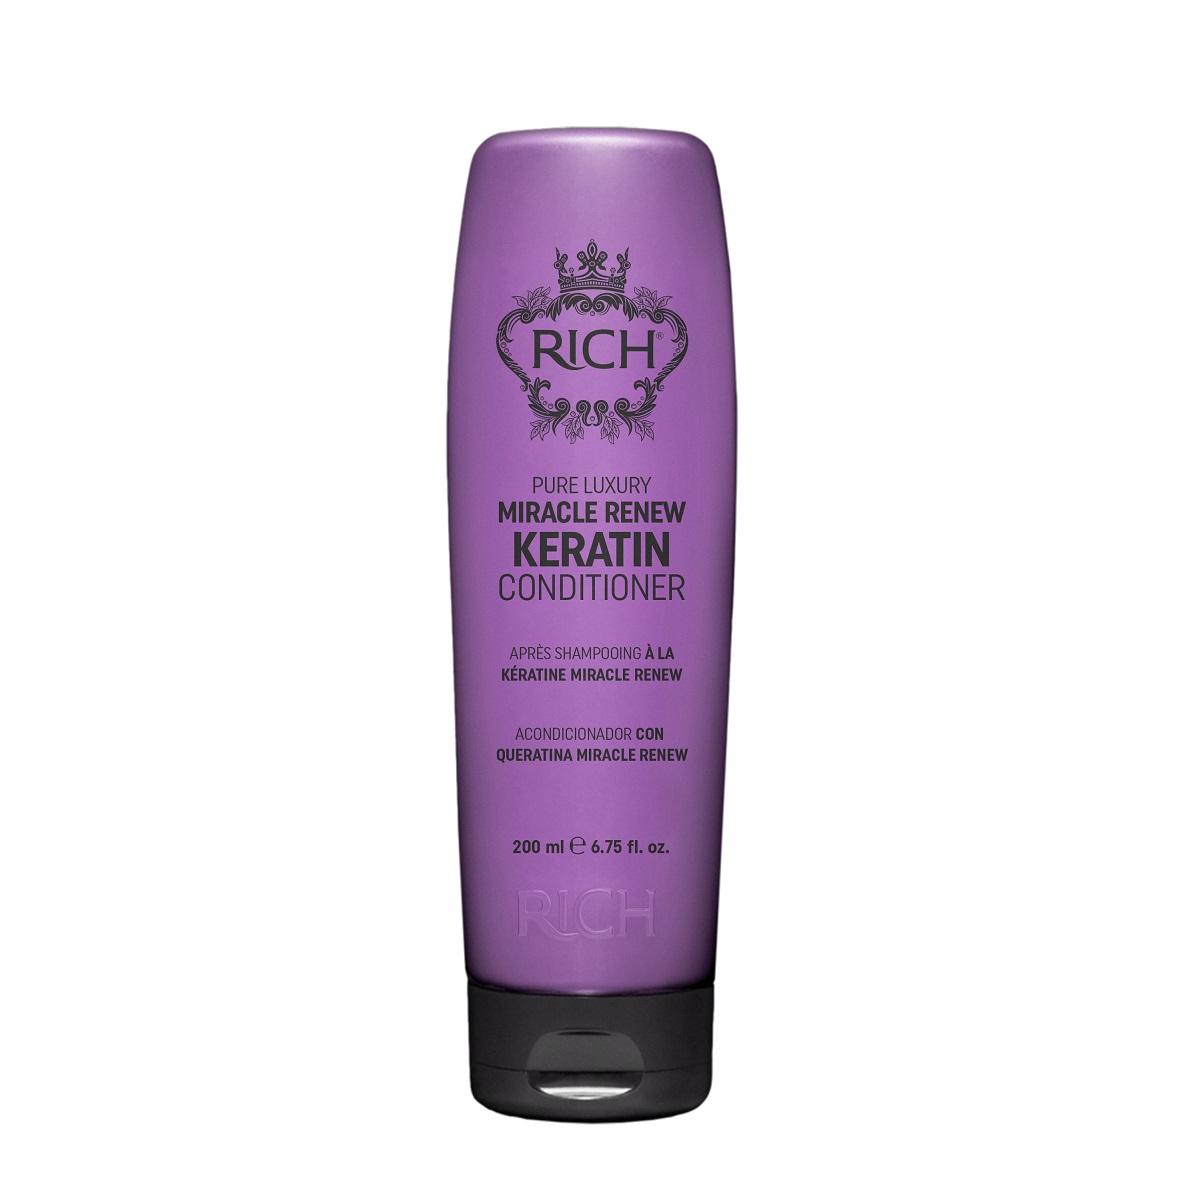 Rich Pure Luxury Miracle Renew Keratin Conditioner Repairing and protective conditioner